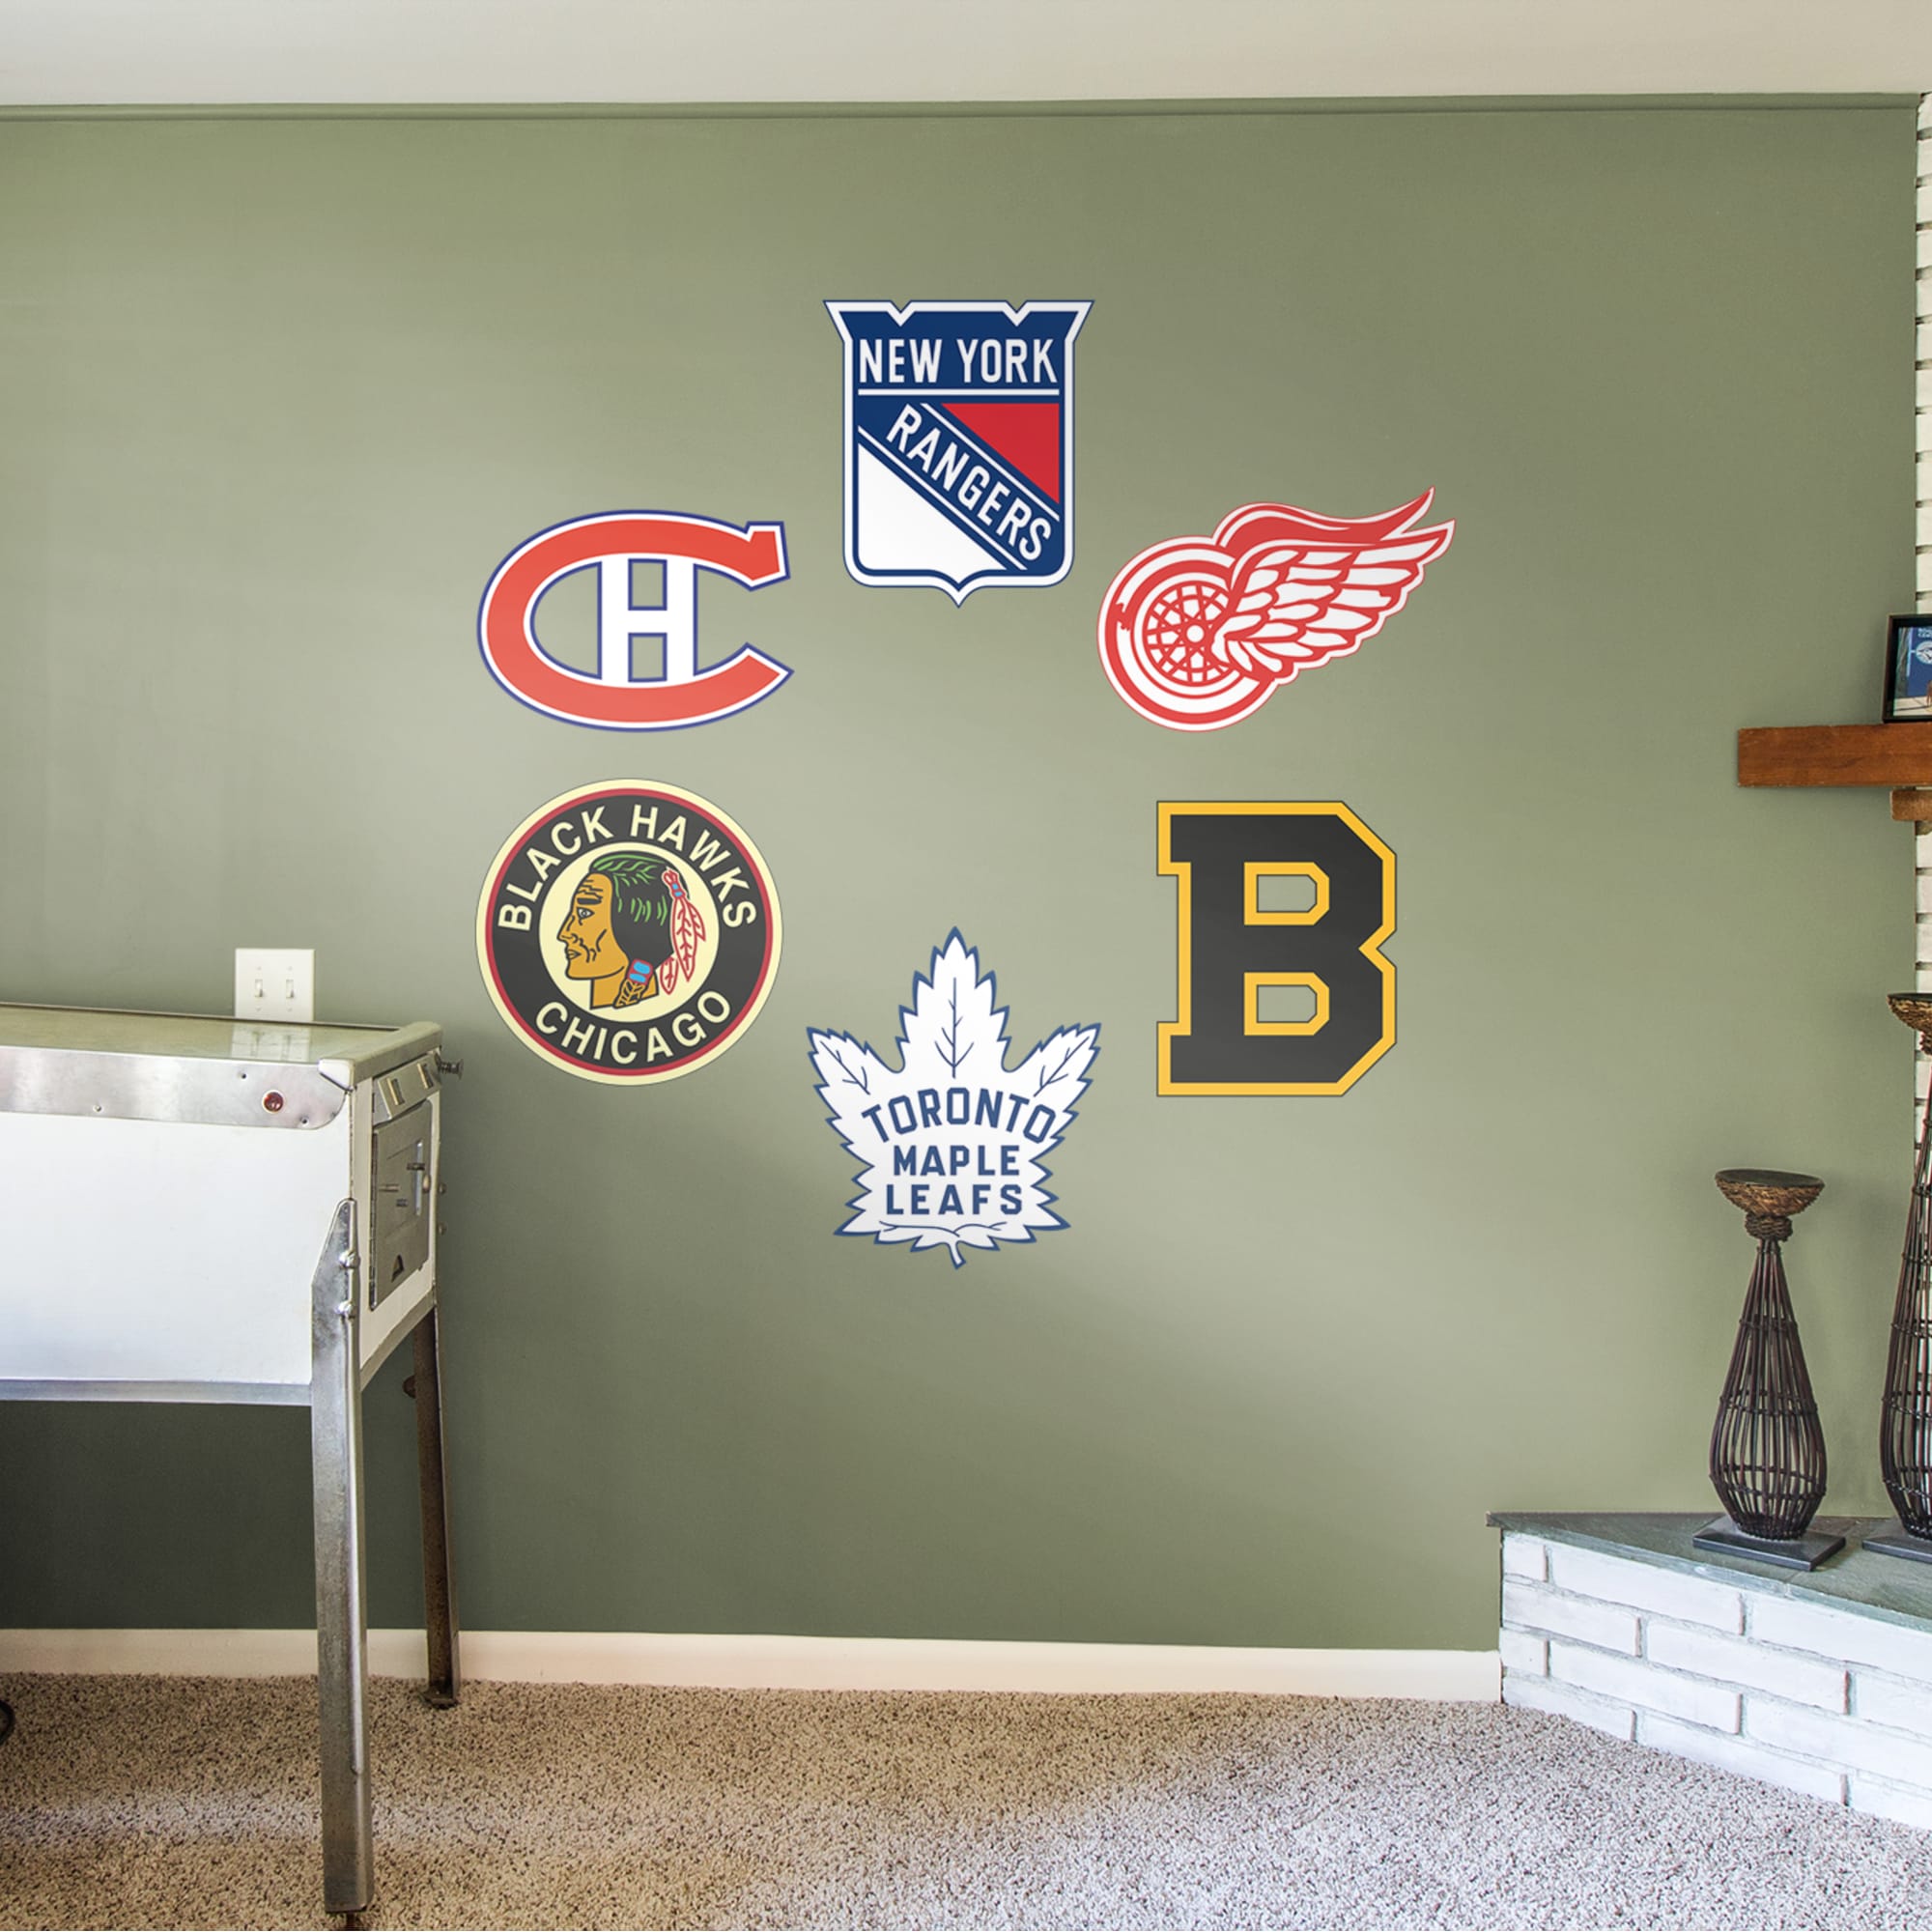 NHL: Original Six Vintage Logos - Officially Licensed Removable Wall Decals 52.0"W x 39.0"H by Fathead | Vinyl